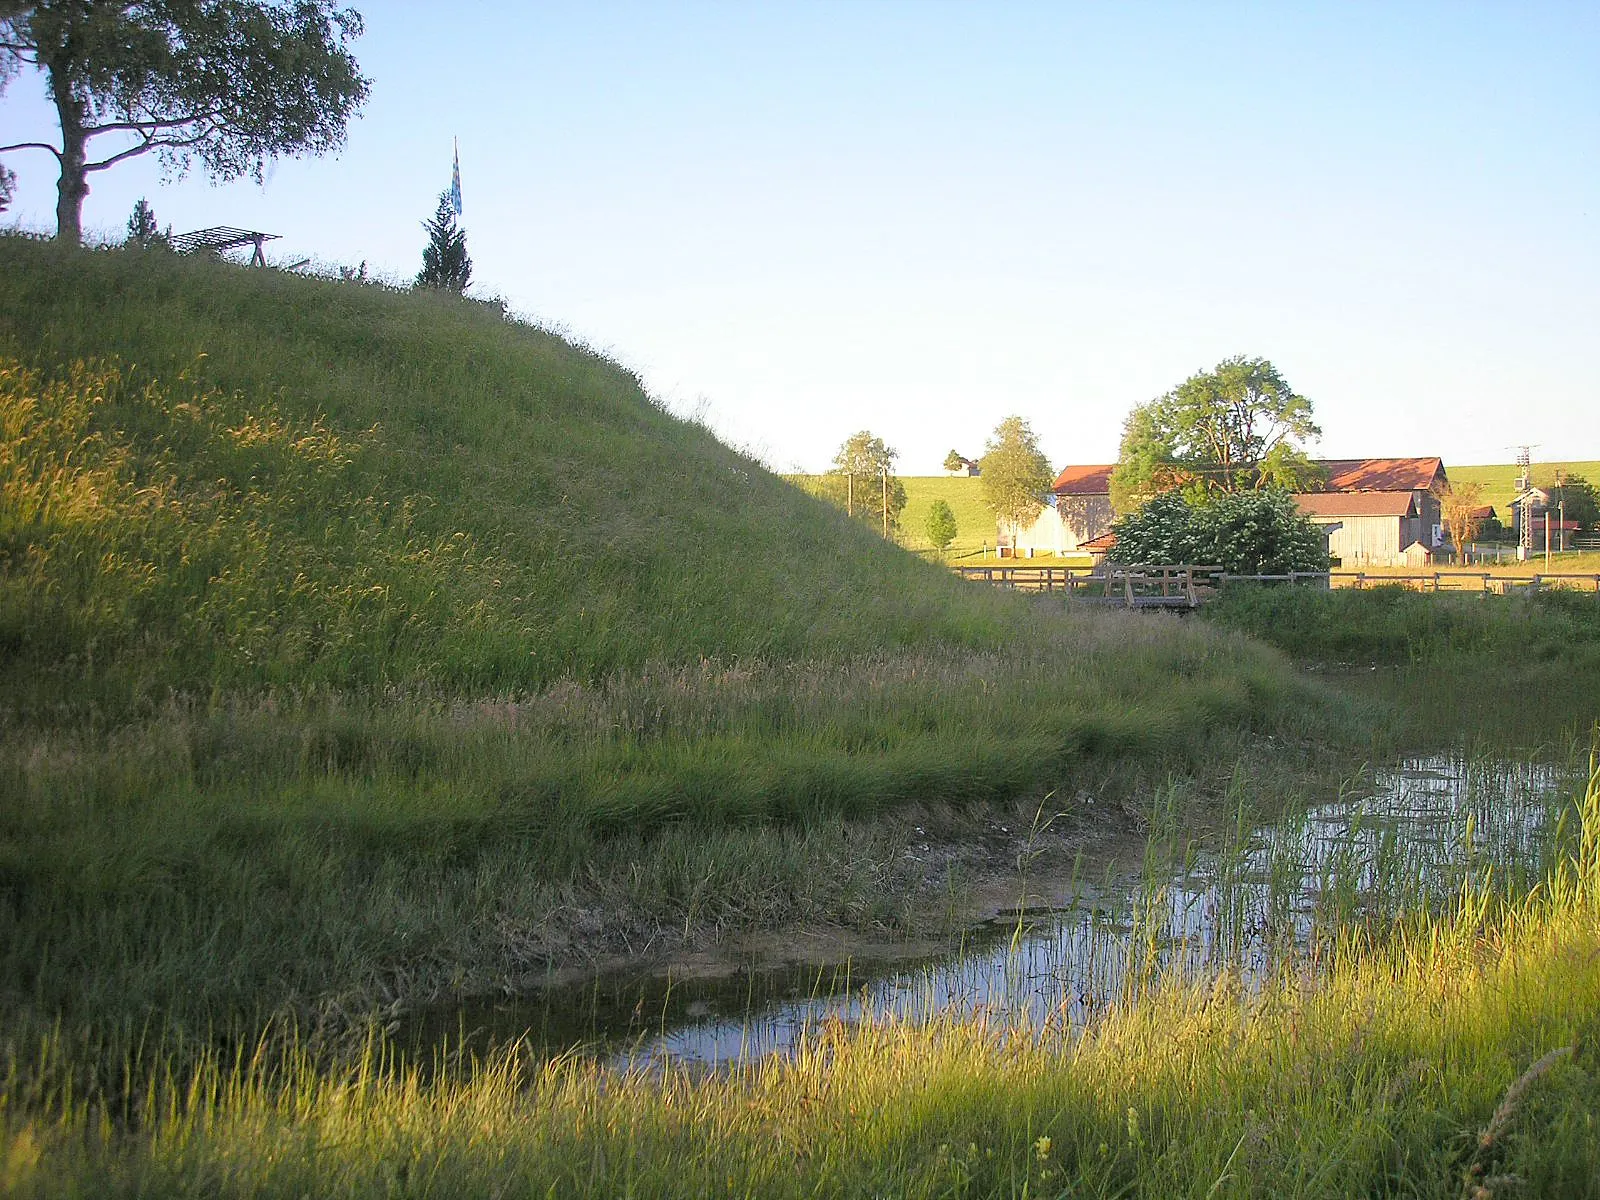 Photo showing: High Middle Ages motte-and-bailey castle at Burk (Seeg, Landkreis Ostallgäu, Bavaria, Germany). Looking into the moat of the central castle